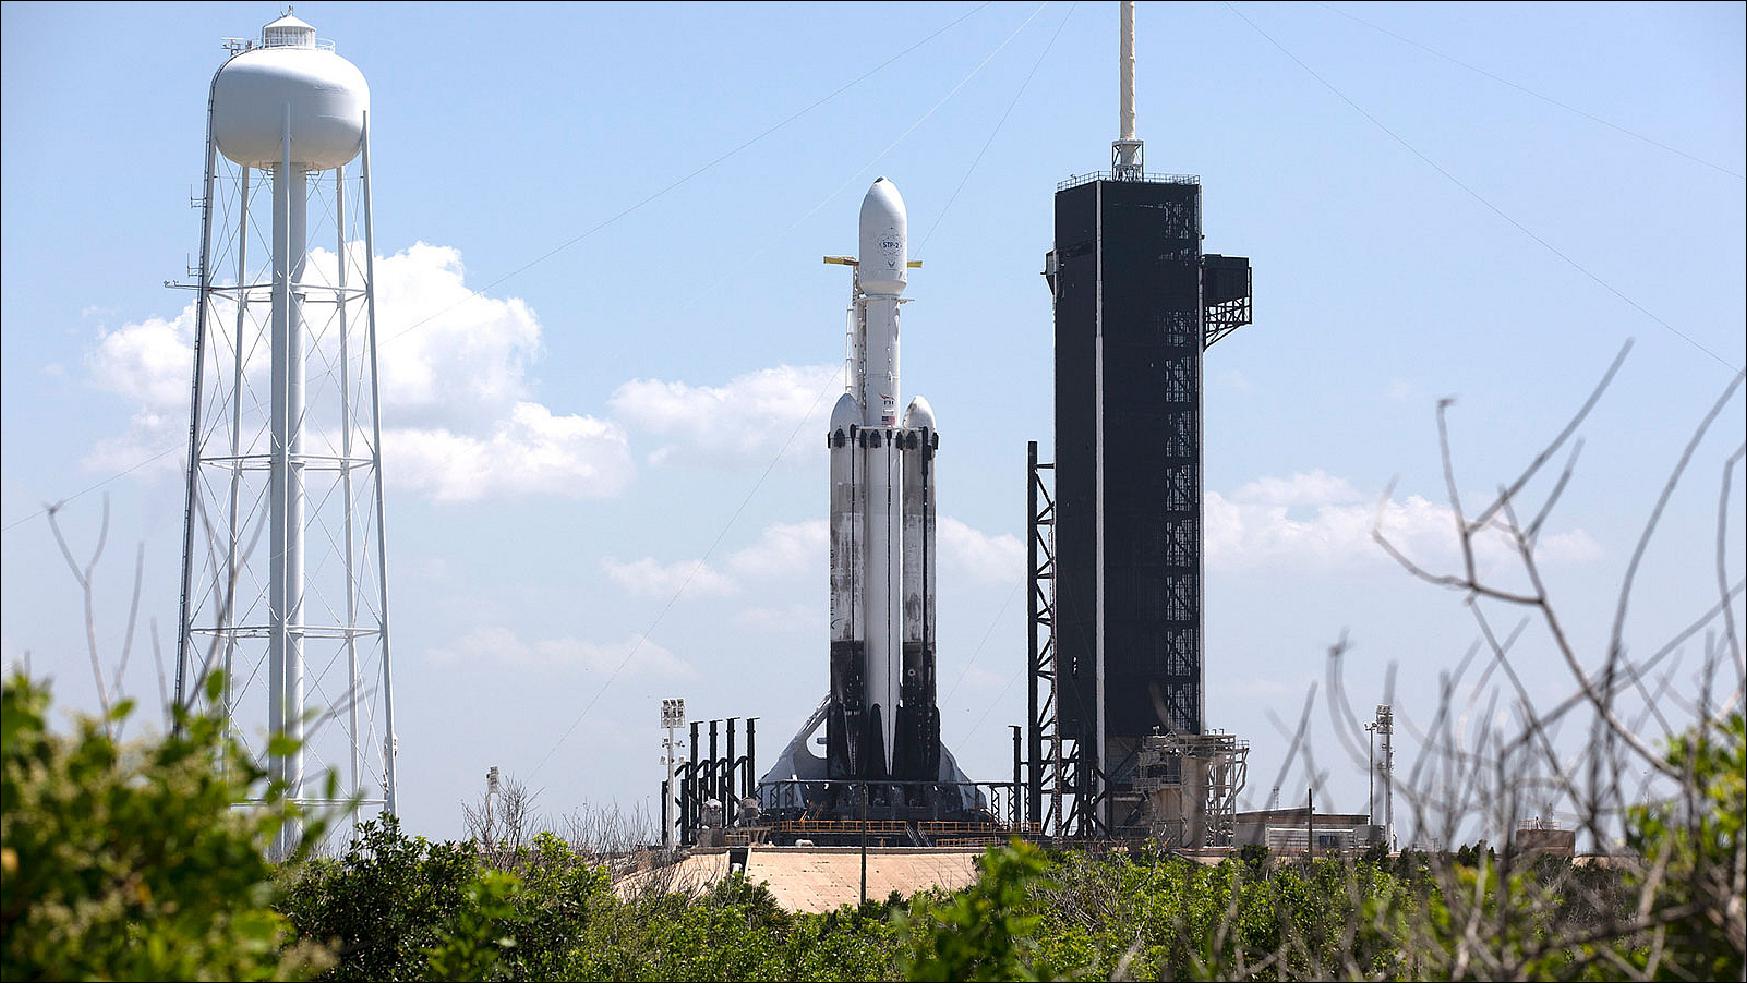 Figure 17: A SpaceX Falcon Heavy rocket is ready for launch on the pad at Launch Complex 39A at NASA's Kennedy Space Center in Florida on June 24, 2019 (image credit: NASA)